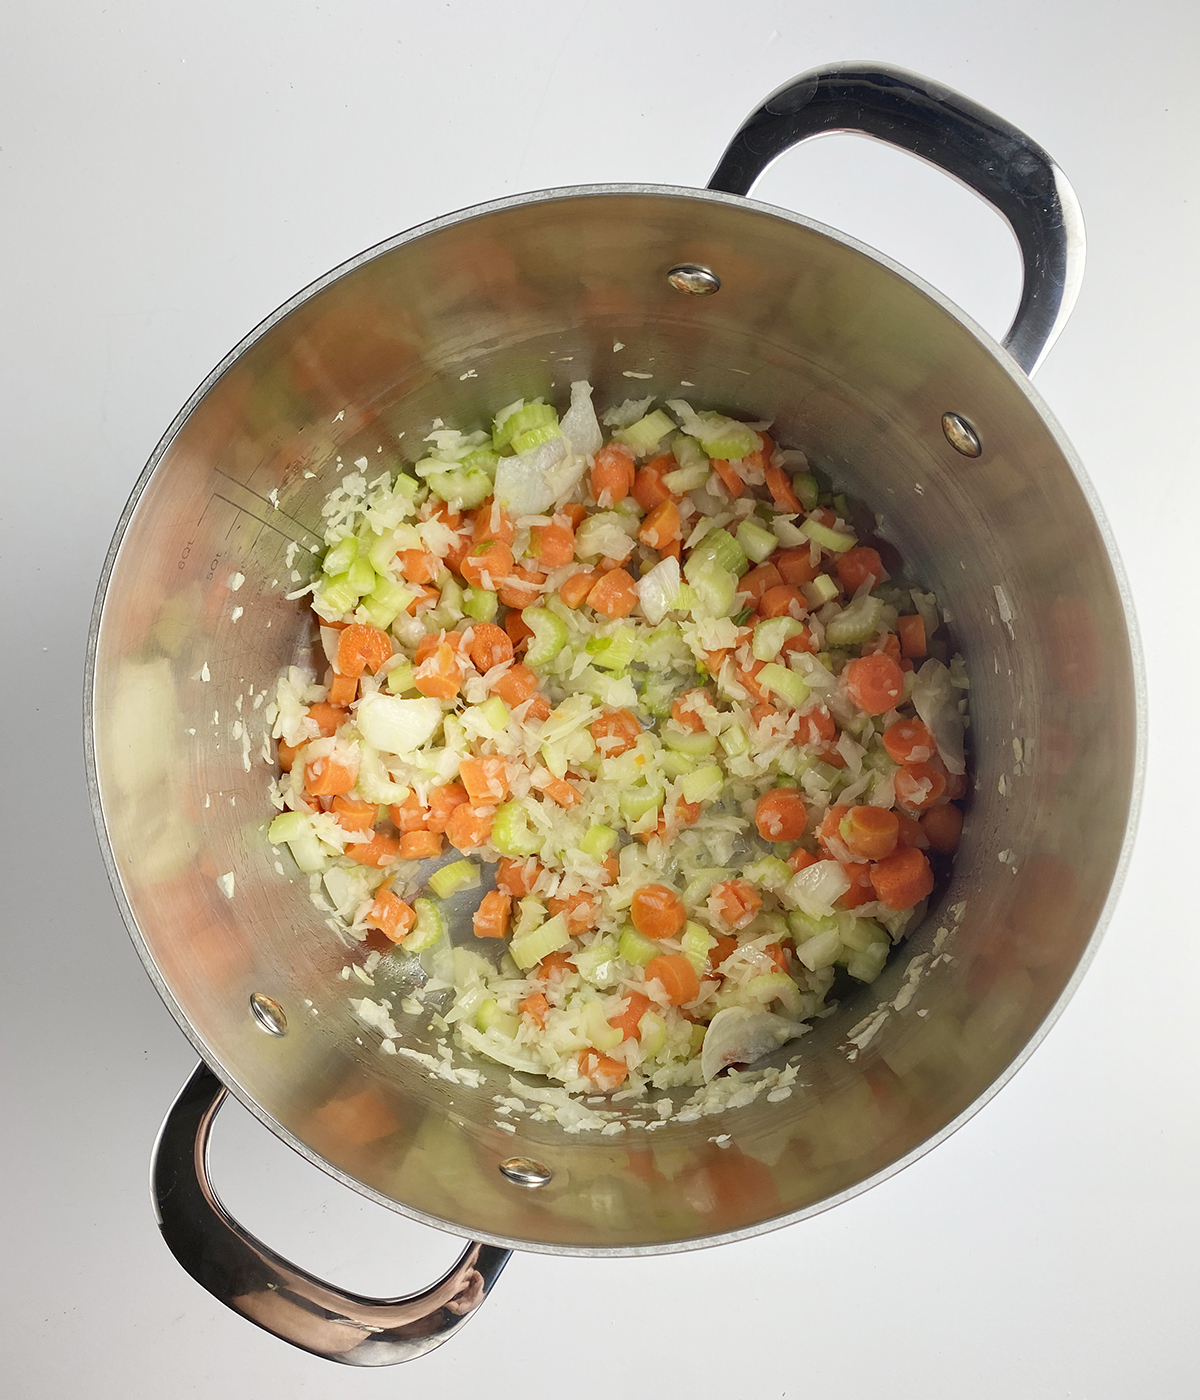 Cooked chopped vegetables in a pot.